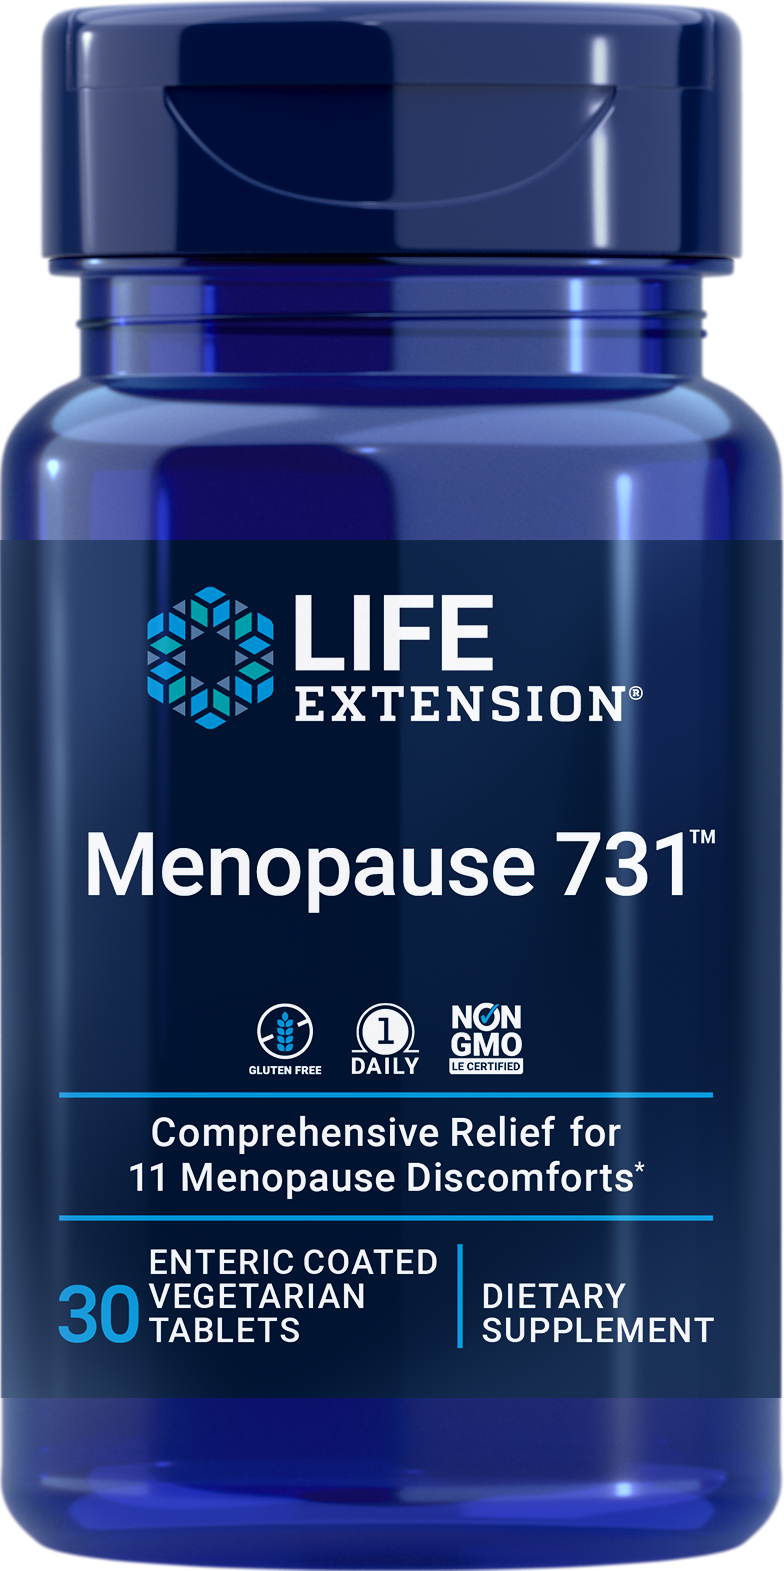 Menopause 731 by Life Extension